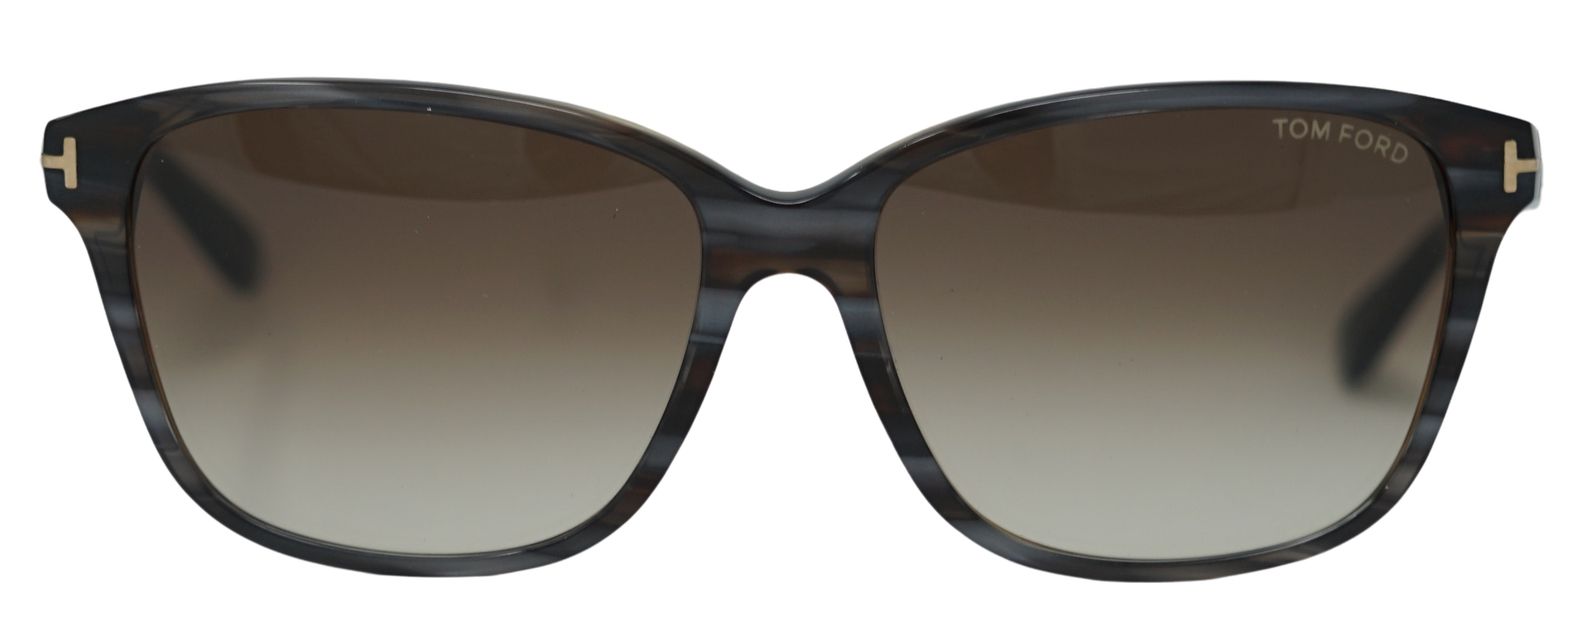 Tom Ford Dana Sunglasses FT0432 20F. Lens Width = 59mm. Nose Bridge Width = 15mm. Arm Length = 140mm. Sunglasses, Sunglasses Case, Cleaning Cloth and Care Instructions all Included. 100% Protection Against UVA & UVB Sunlight and Conform to British Standard EN 1836:2005